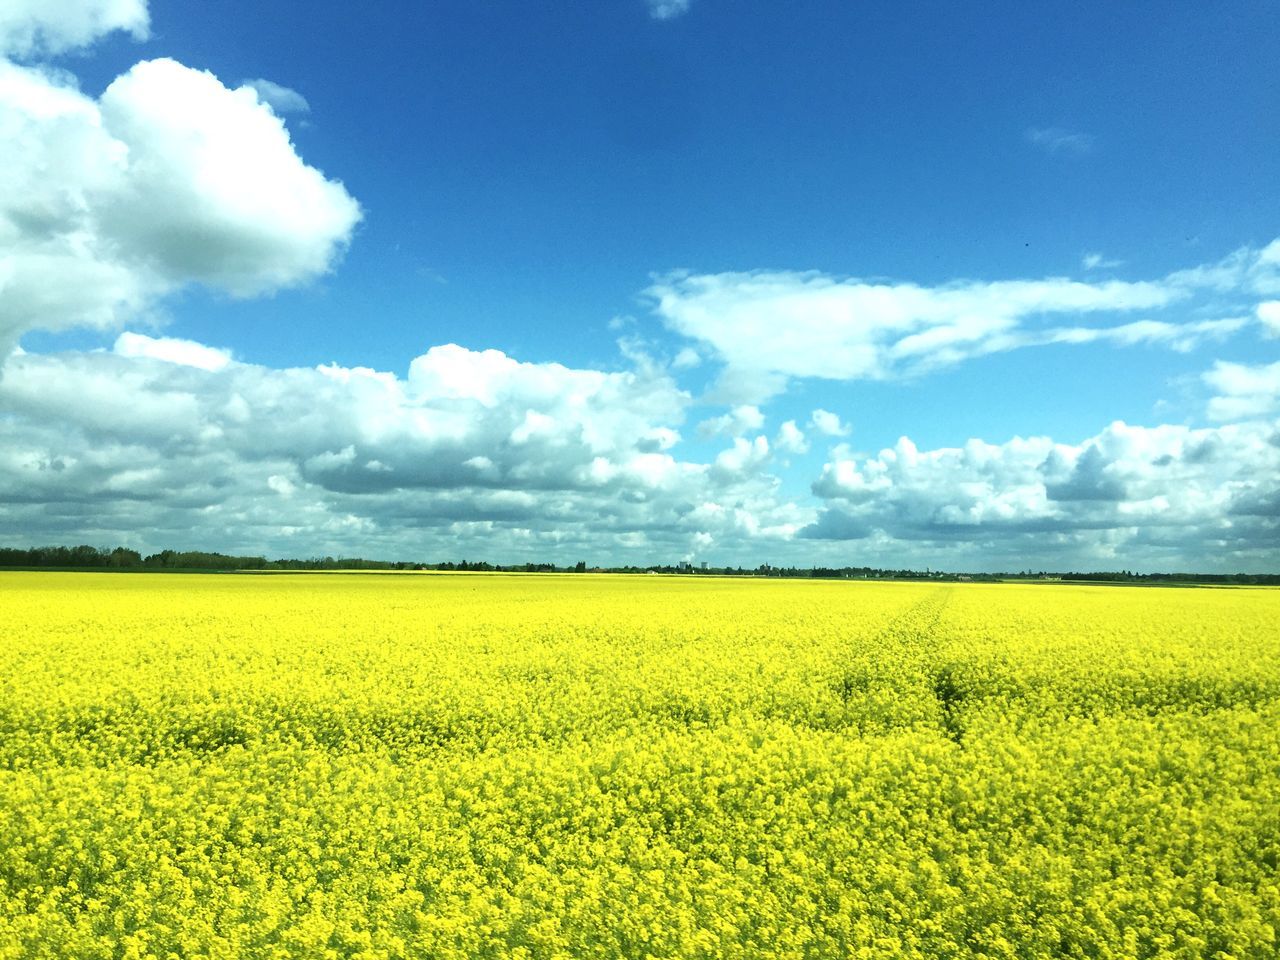 yellow, agriculture, rural scene, field, flower, beauty in nature, landscape, sky, tranquil scene, farm, growth, scenics, tranquility, nature, oilseed rape, crop, cloud - sky, freshness, cloud, abundance